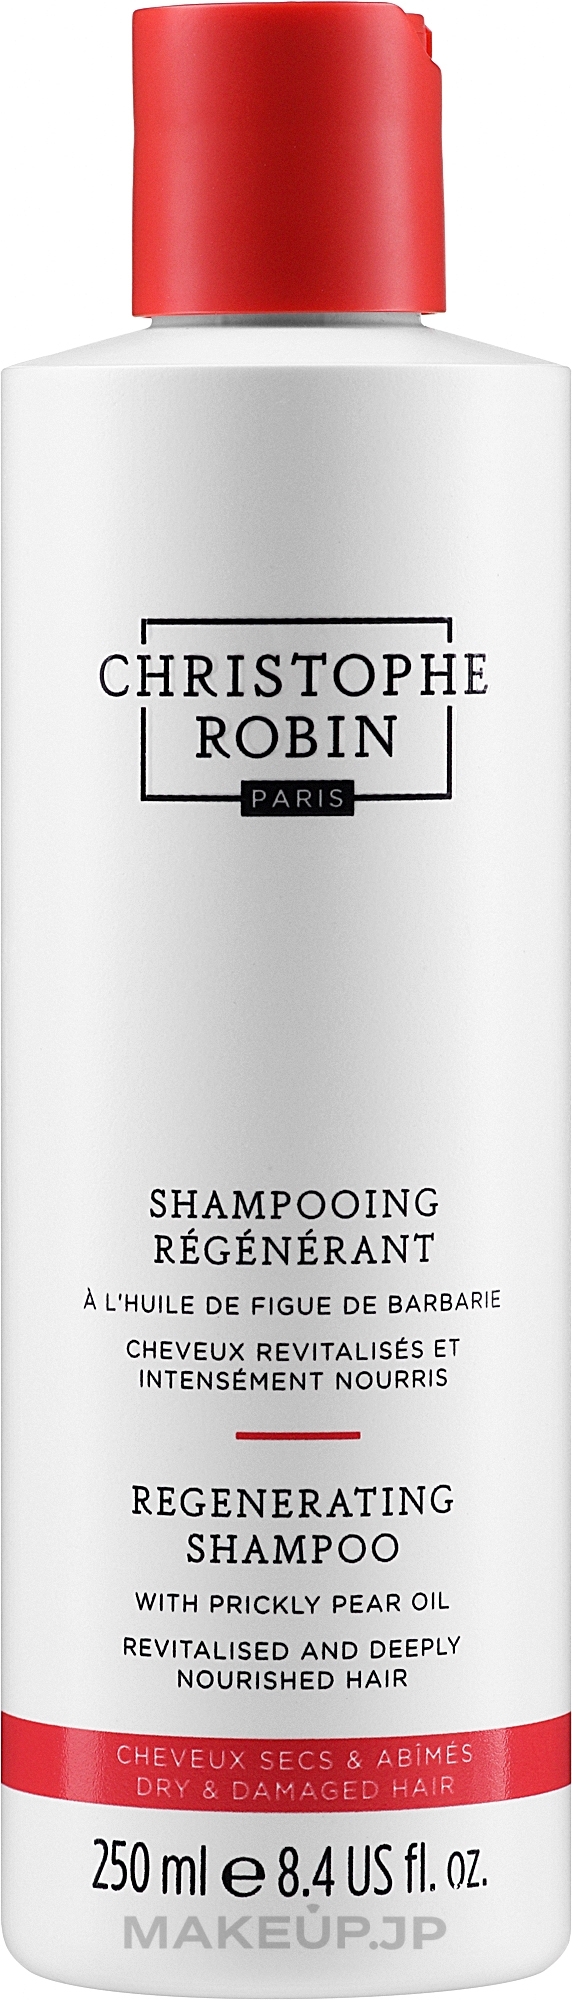 Regenerating Shampoo with Prickly Pear Oil - Christophe Robin Regenerating Shampoo with Prickly Pear Oil — photo 250 ml